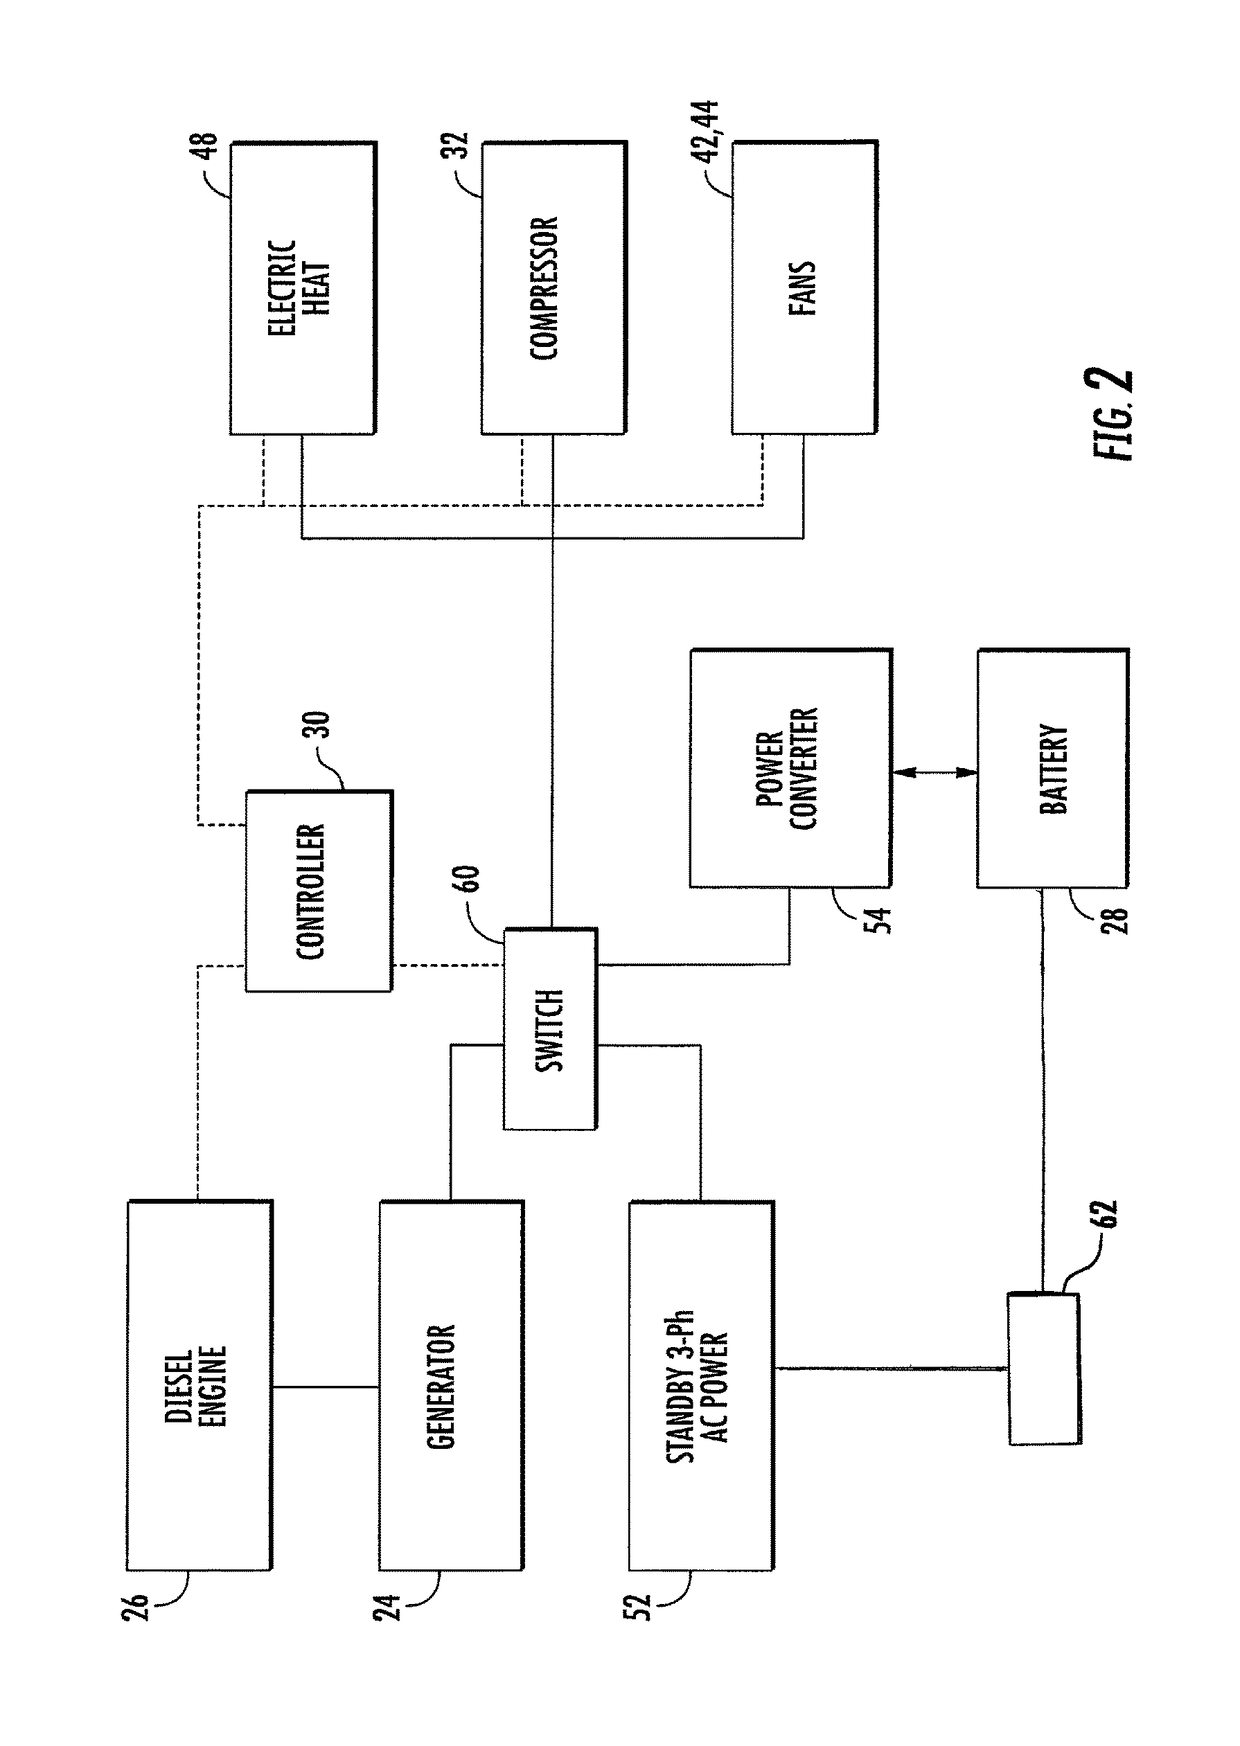 Transport refrigeration system and method for operating